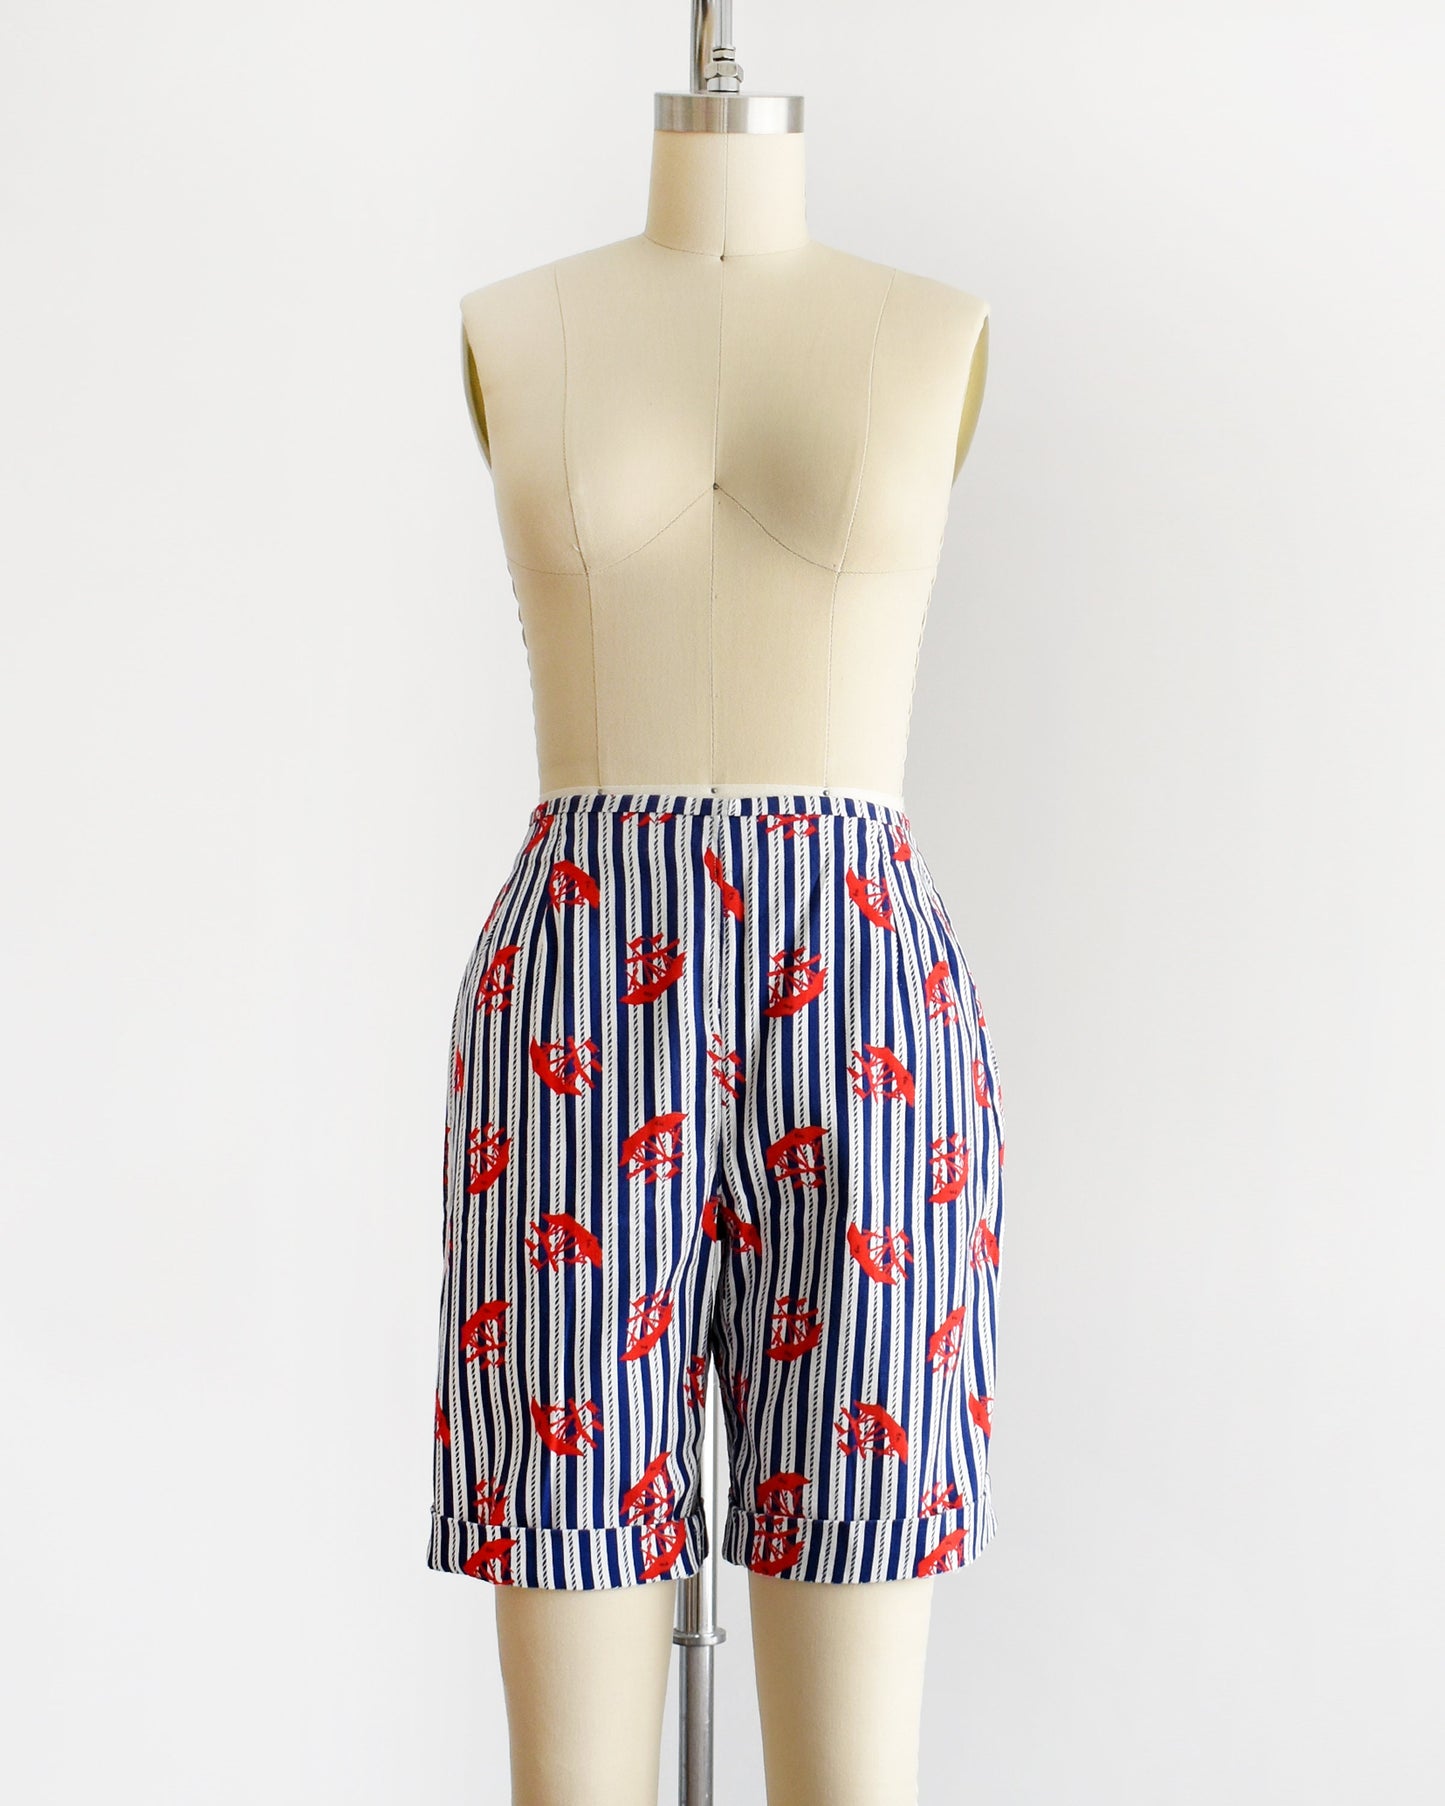 A pair of vintage 60s shorts that are navy blue and white vertical striped with a red clipper ship print. The shorts are modeled on a dress form. The shorts are cuffed in this photo